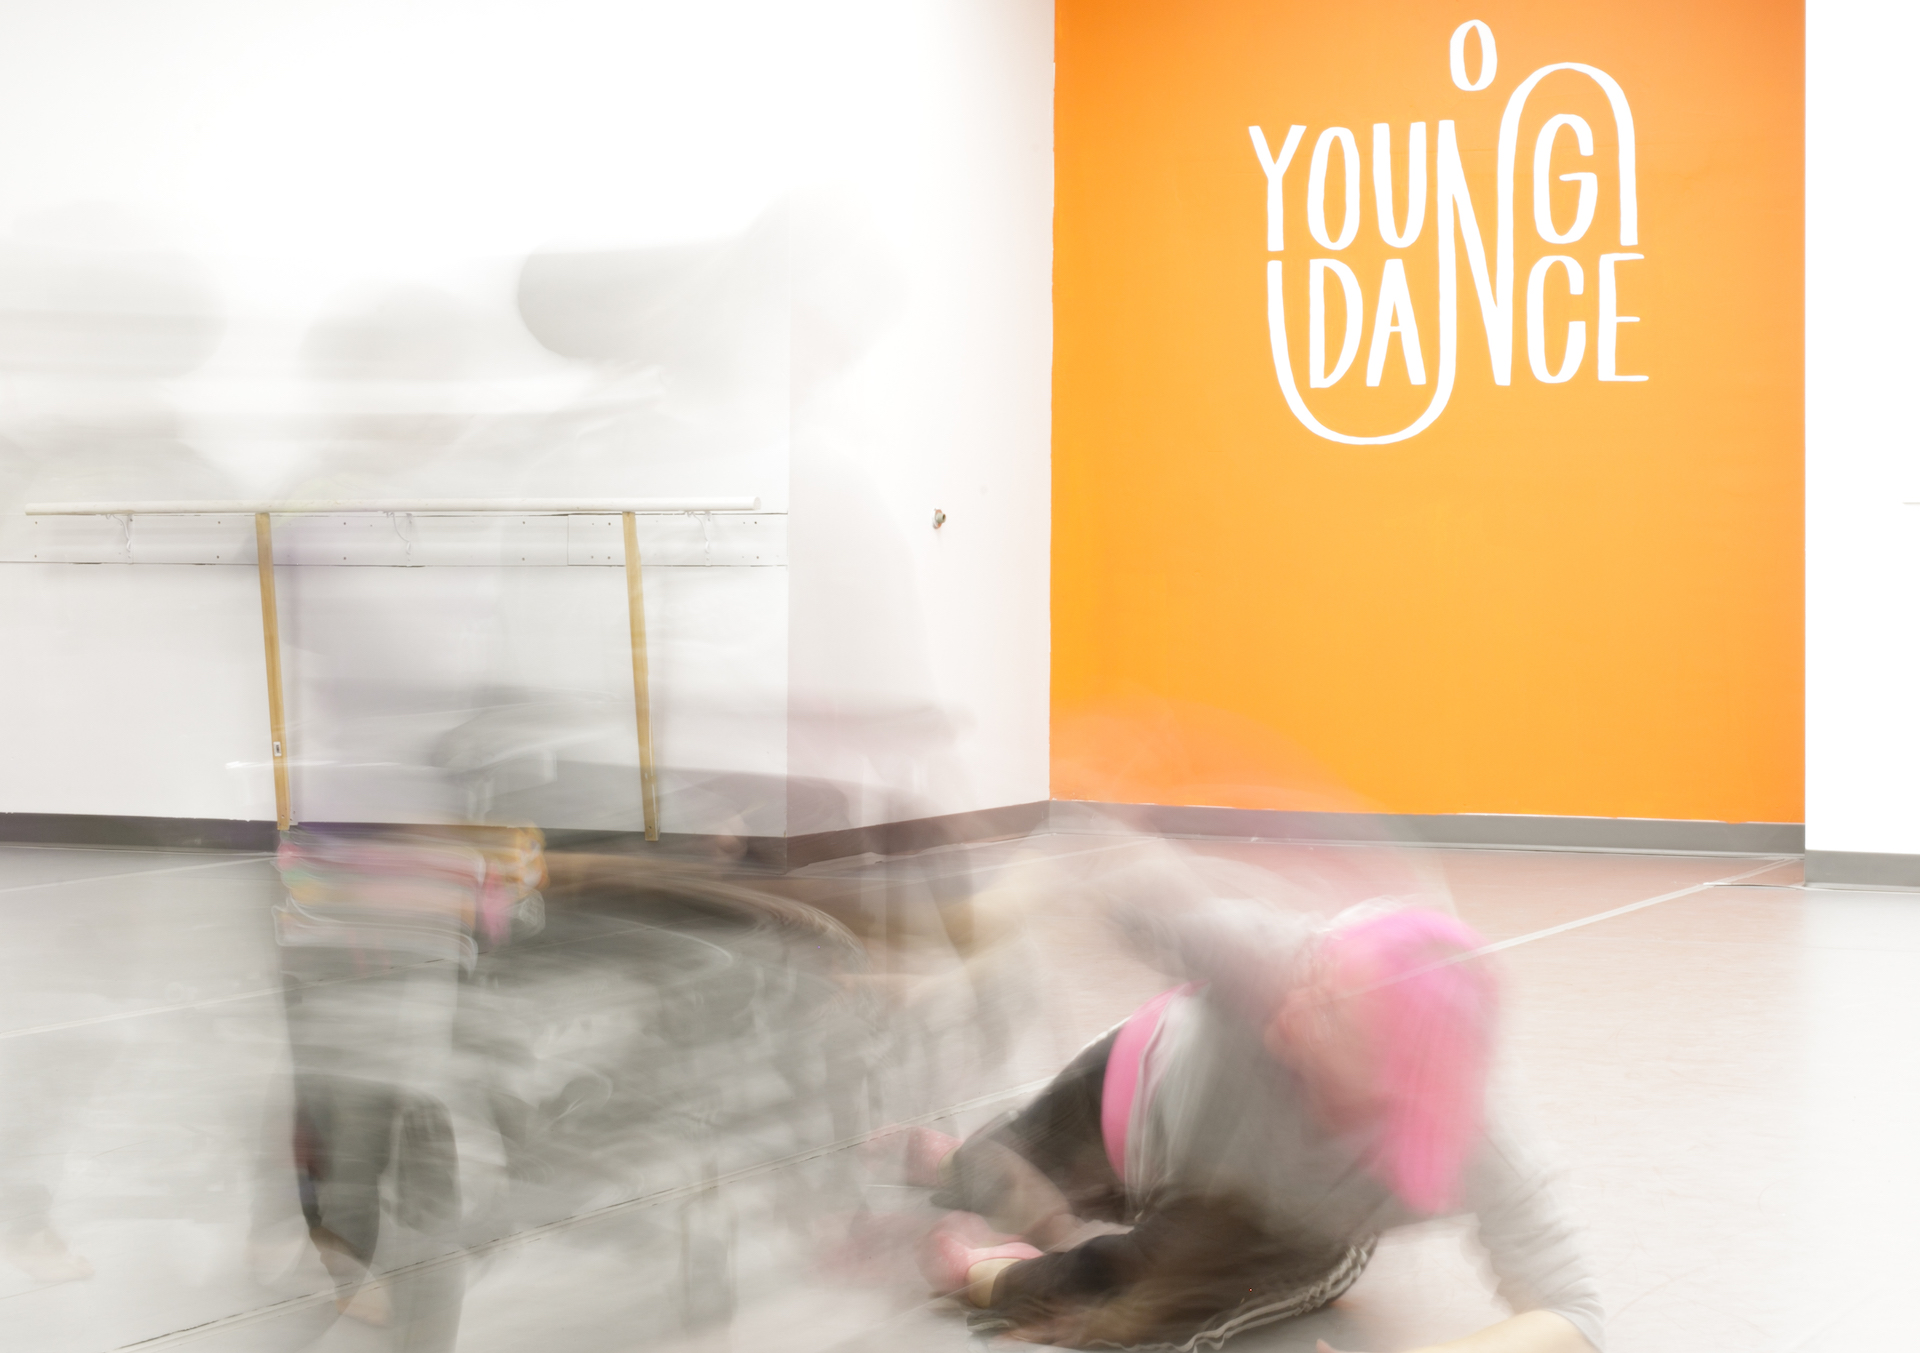 Image of orange studio with blurry dancers. One dancer is in a wheelchair. 